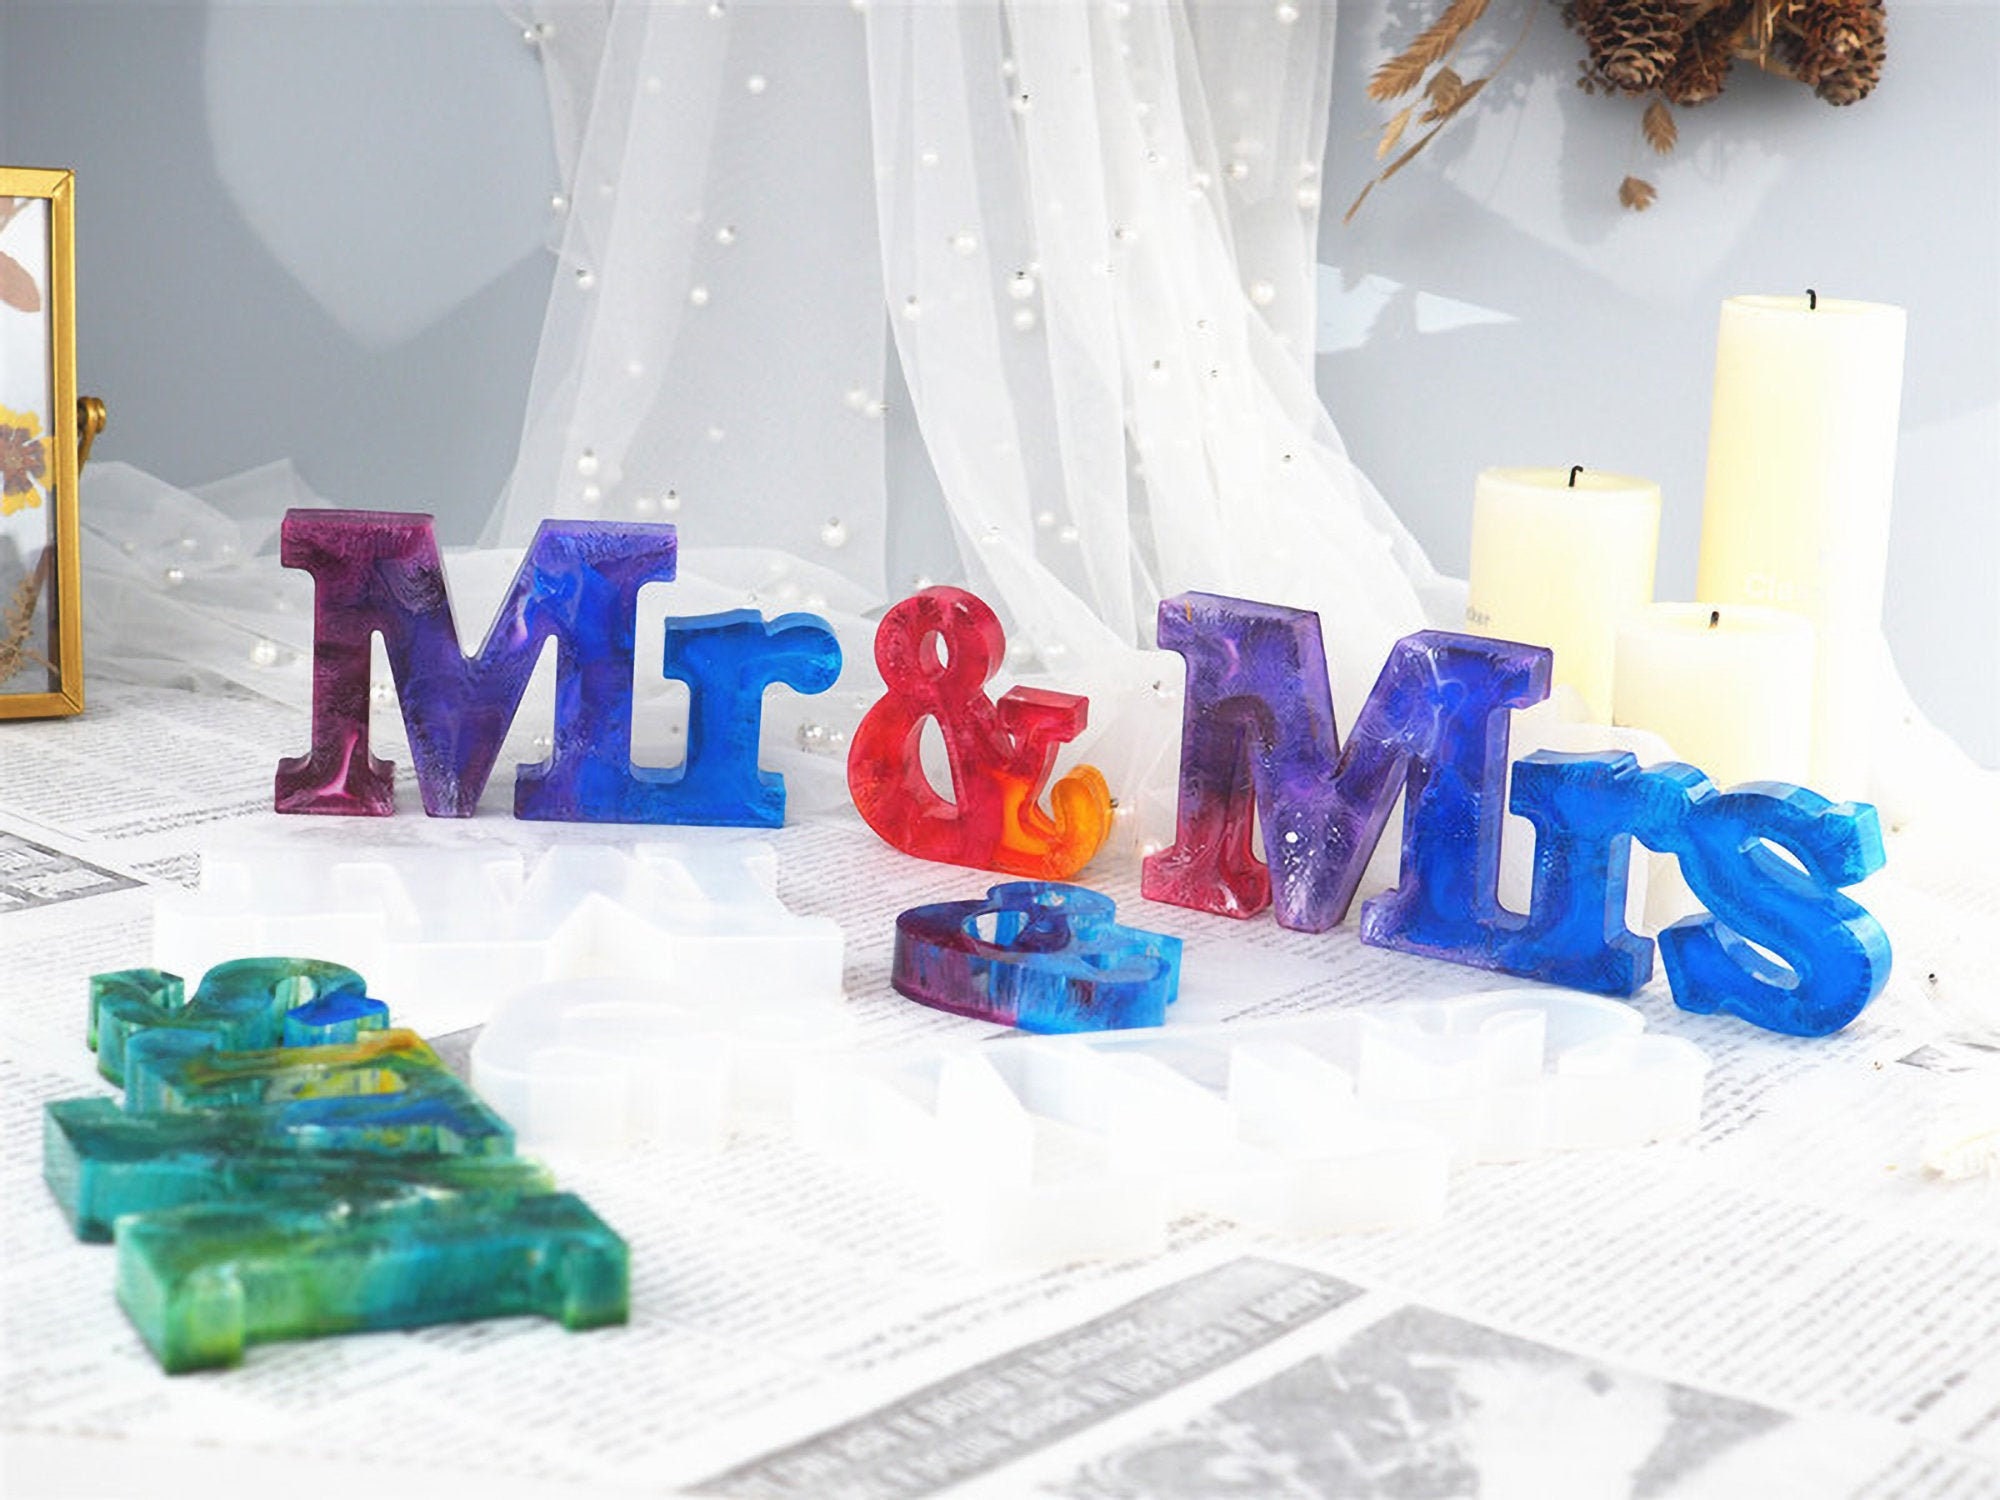 Mr & Mrs Mold,Alphabet Silicone Mould,Creative Glue Mold,DIY Crystal Glue Mold,Silicone Mold,Soft Silicone Mould,Nice Decoration.